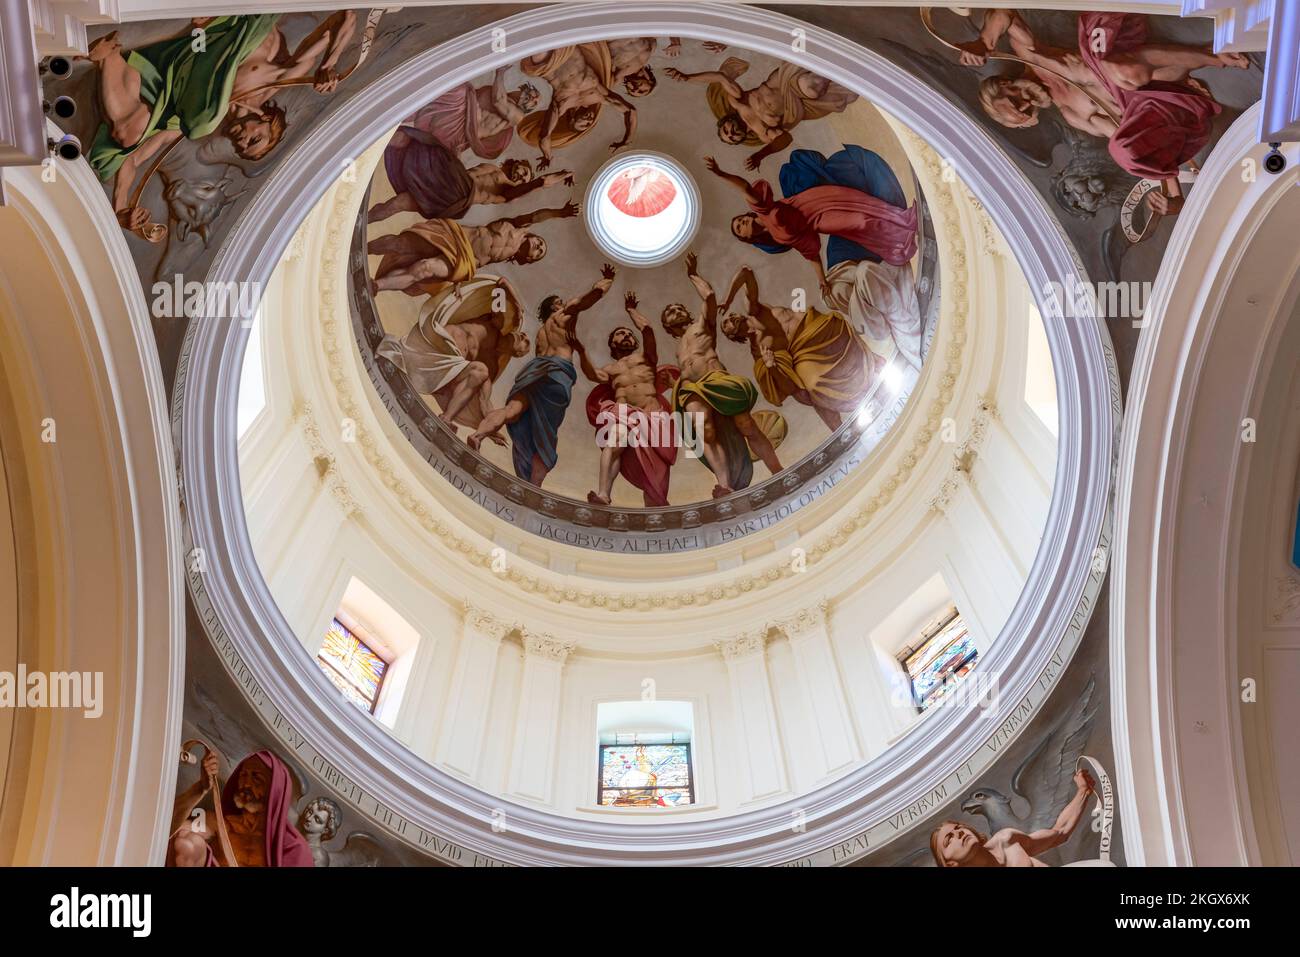 The Interior of Noto Cathedral (Cattedrale di Noto), Sicily, Italy. Stock Photo